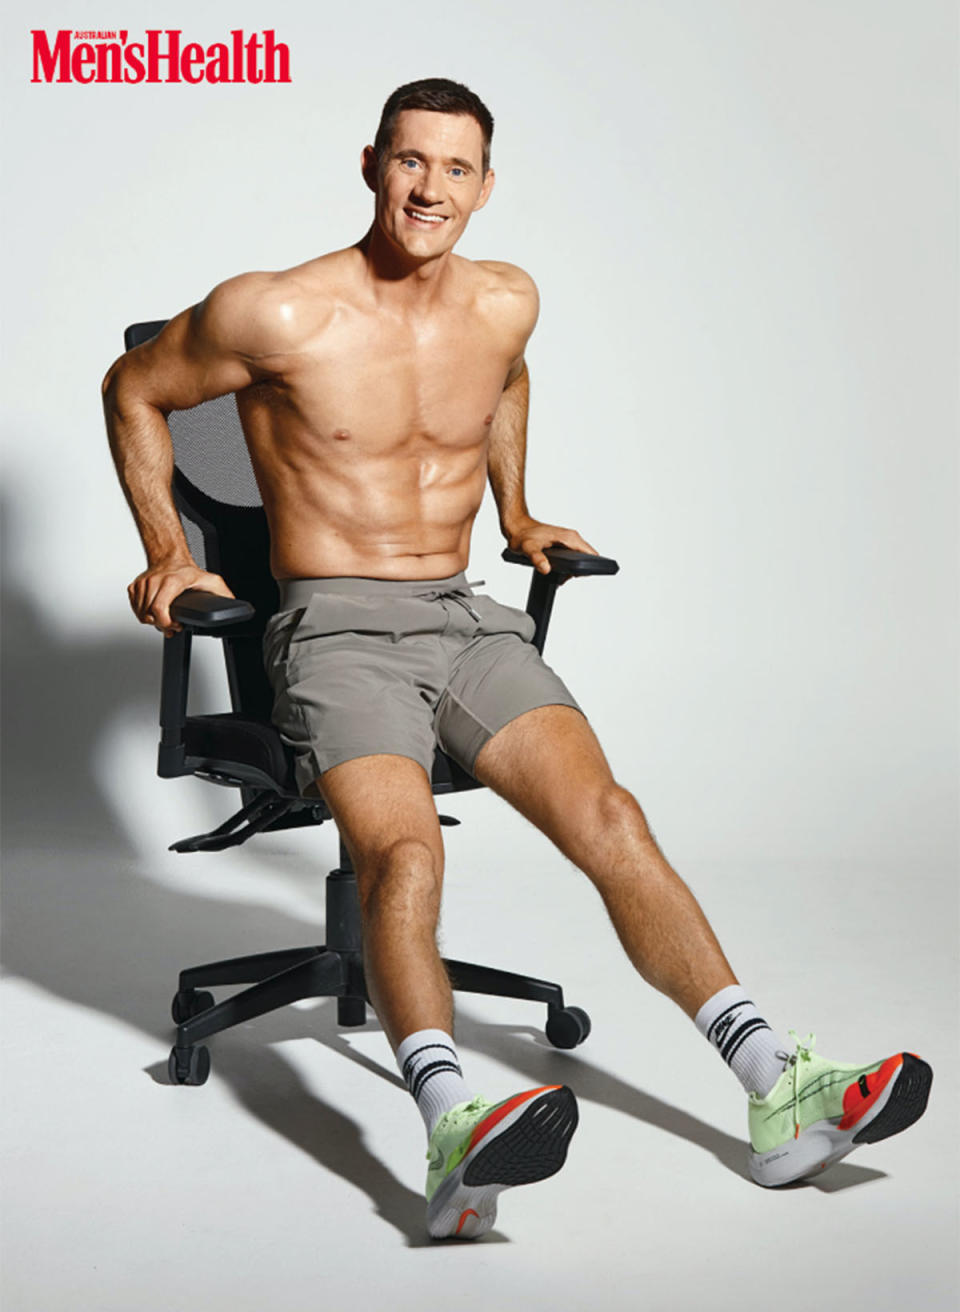 Ed Cavalee sitting in a desk chair, wearing grey shorts and sneakers, no shirt.